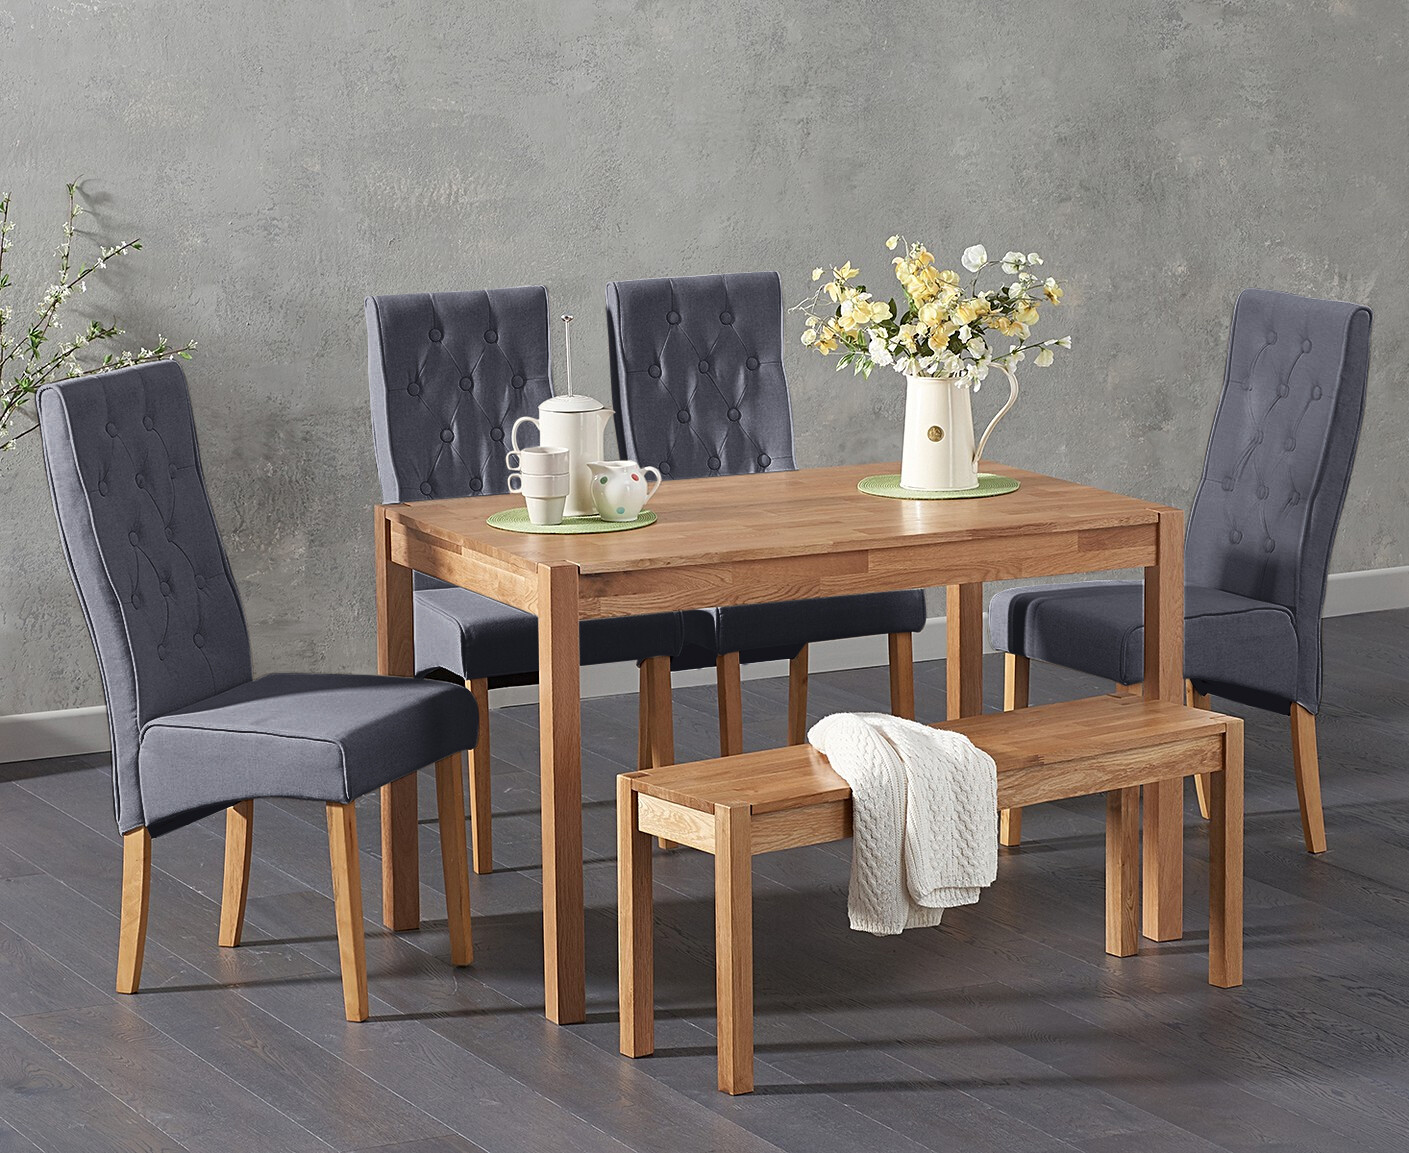 York 120cm Solid Oak Dining Table With 4 Grey Maya Chairs With 2 Oak Benches